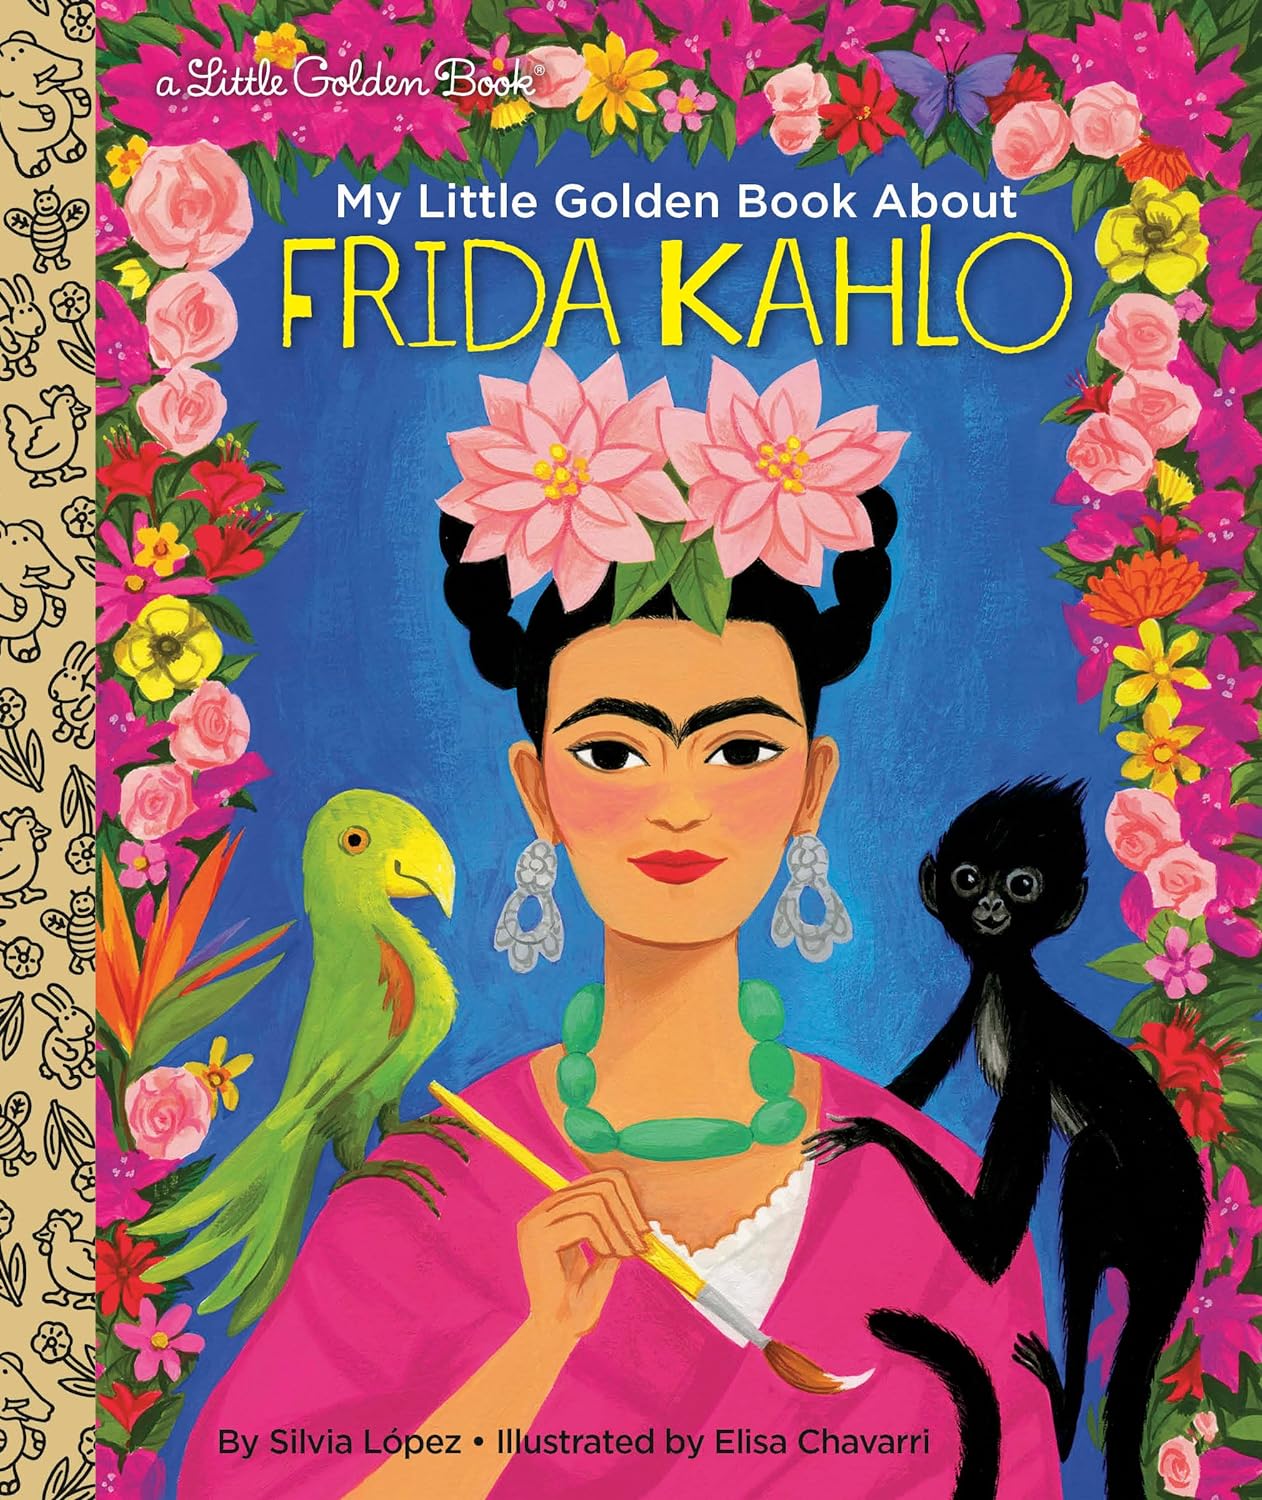 front cover of frida kahlo book with illistration of frida surrounded by flowers and animals.